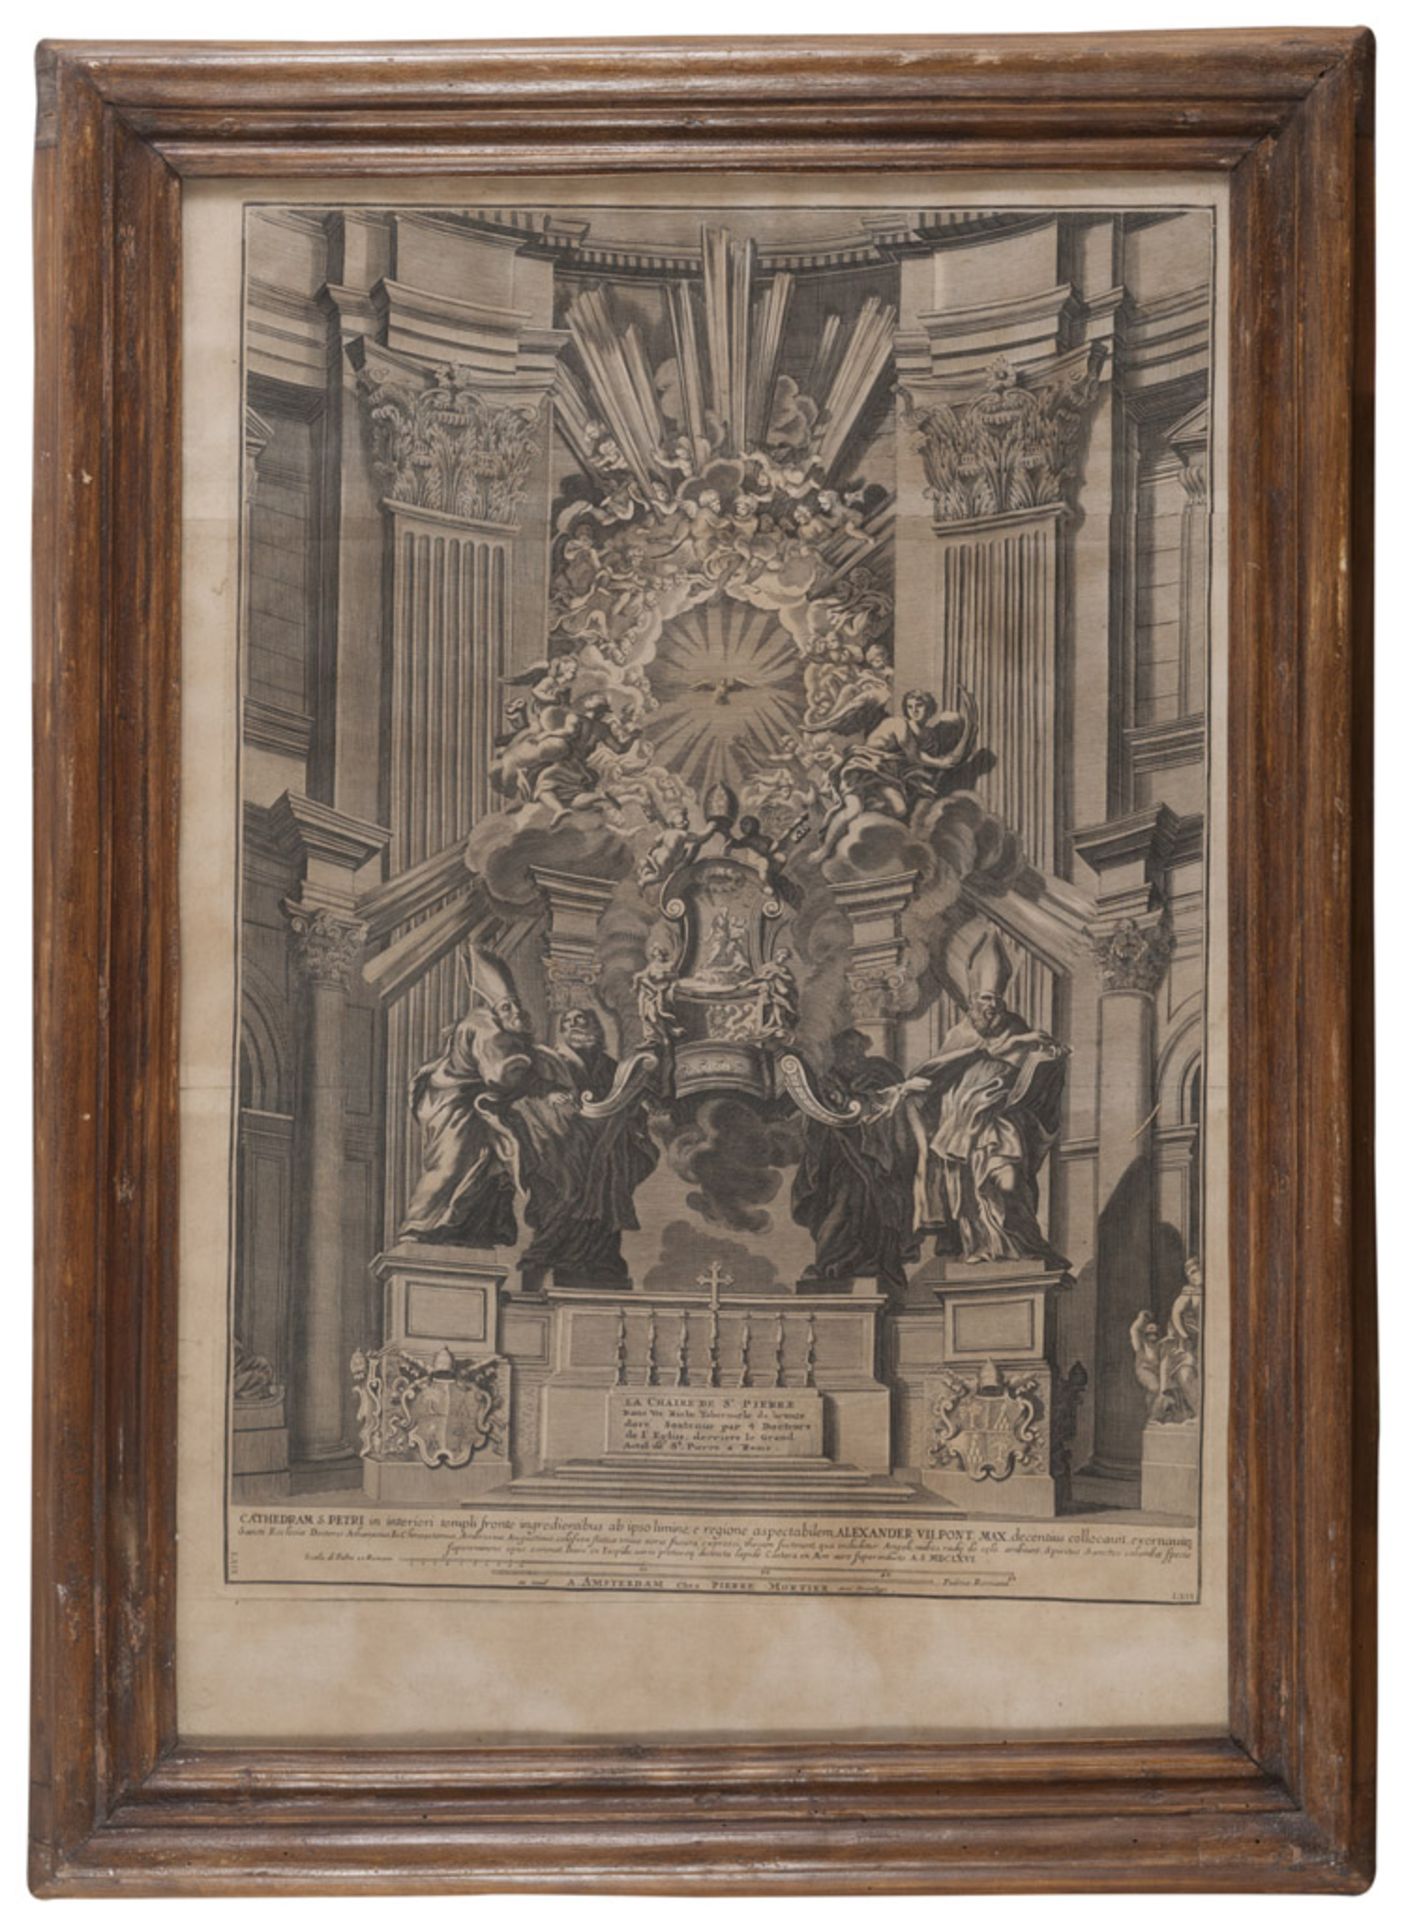 PIERRE MORTIER (Leida 1661 - Amsterdam 1711) THE CHAIR OF ST. PETER Etching, cm. 76 x 51 FRAME